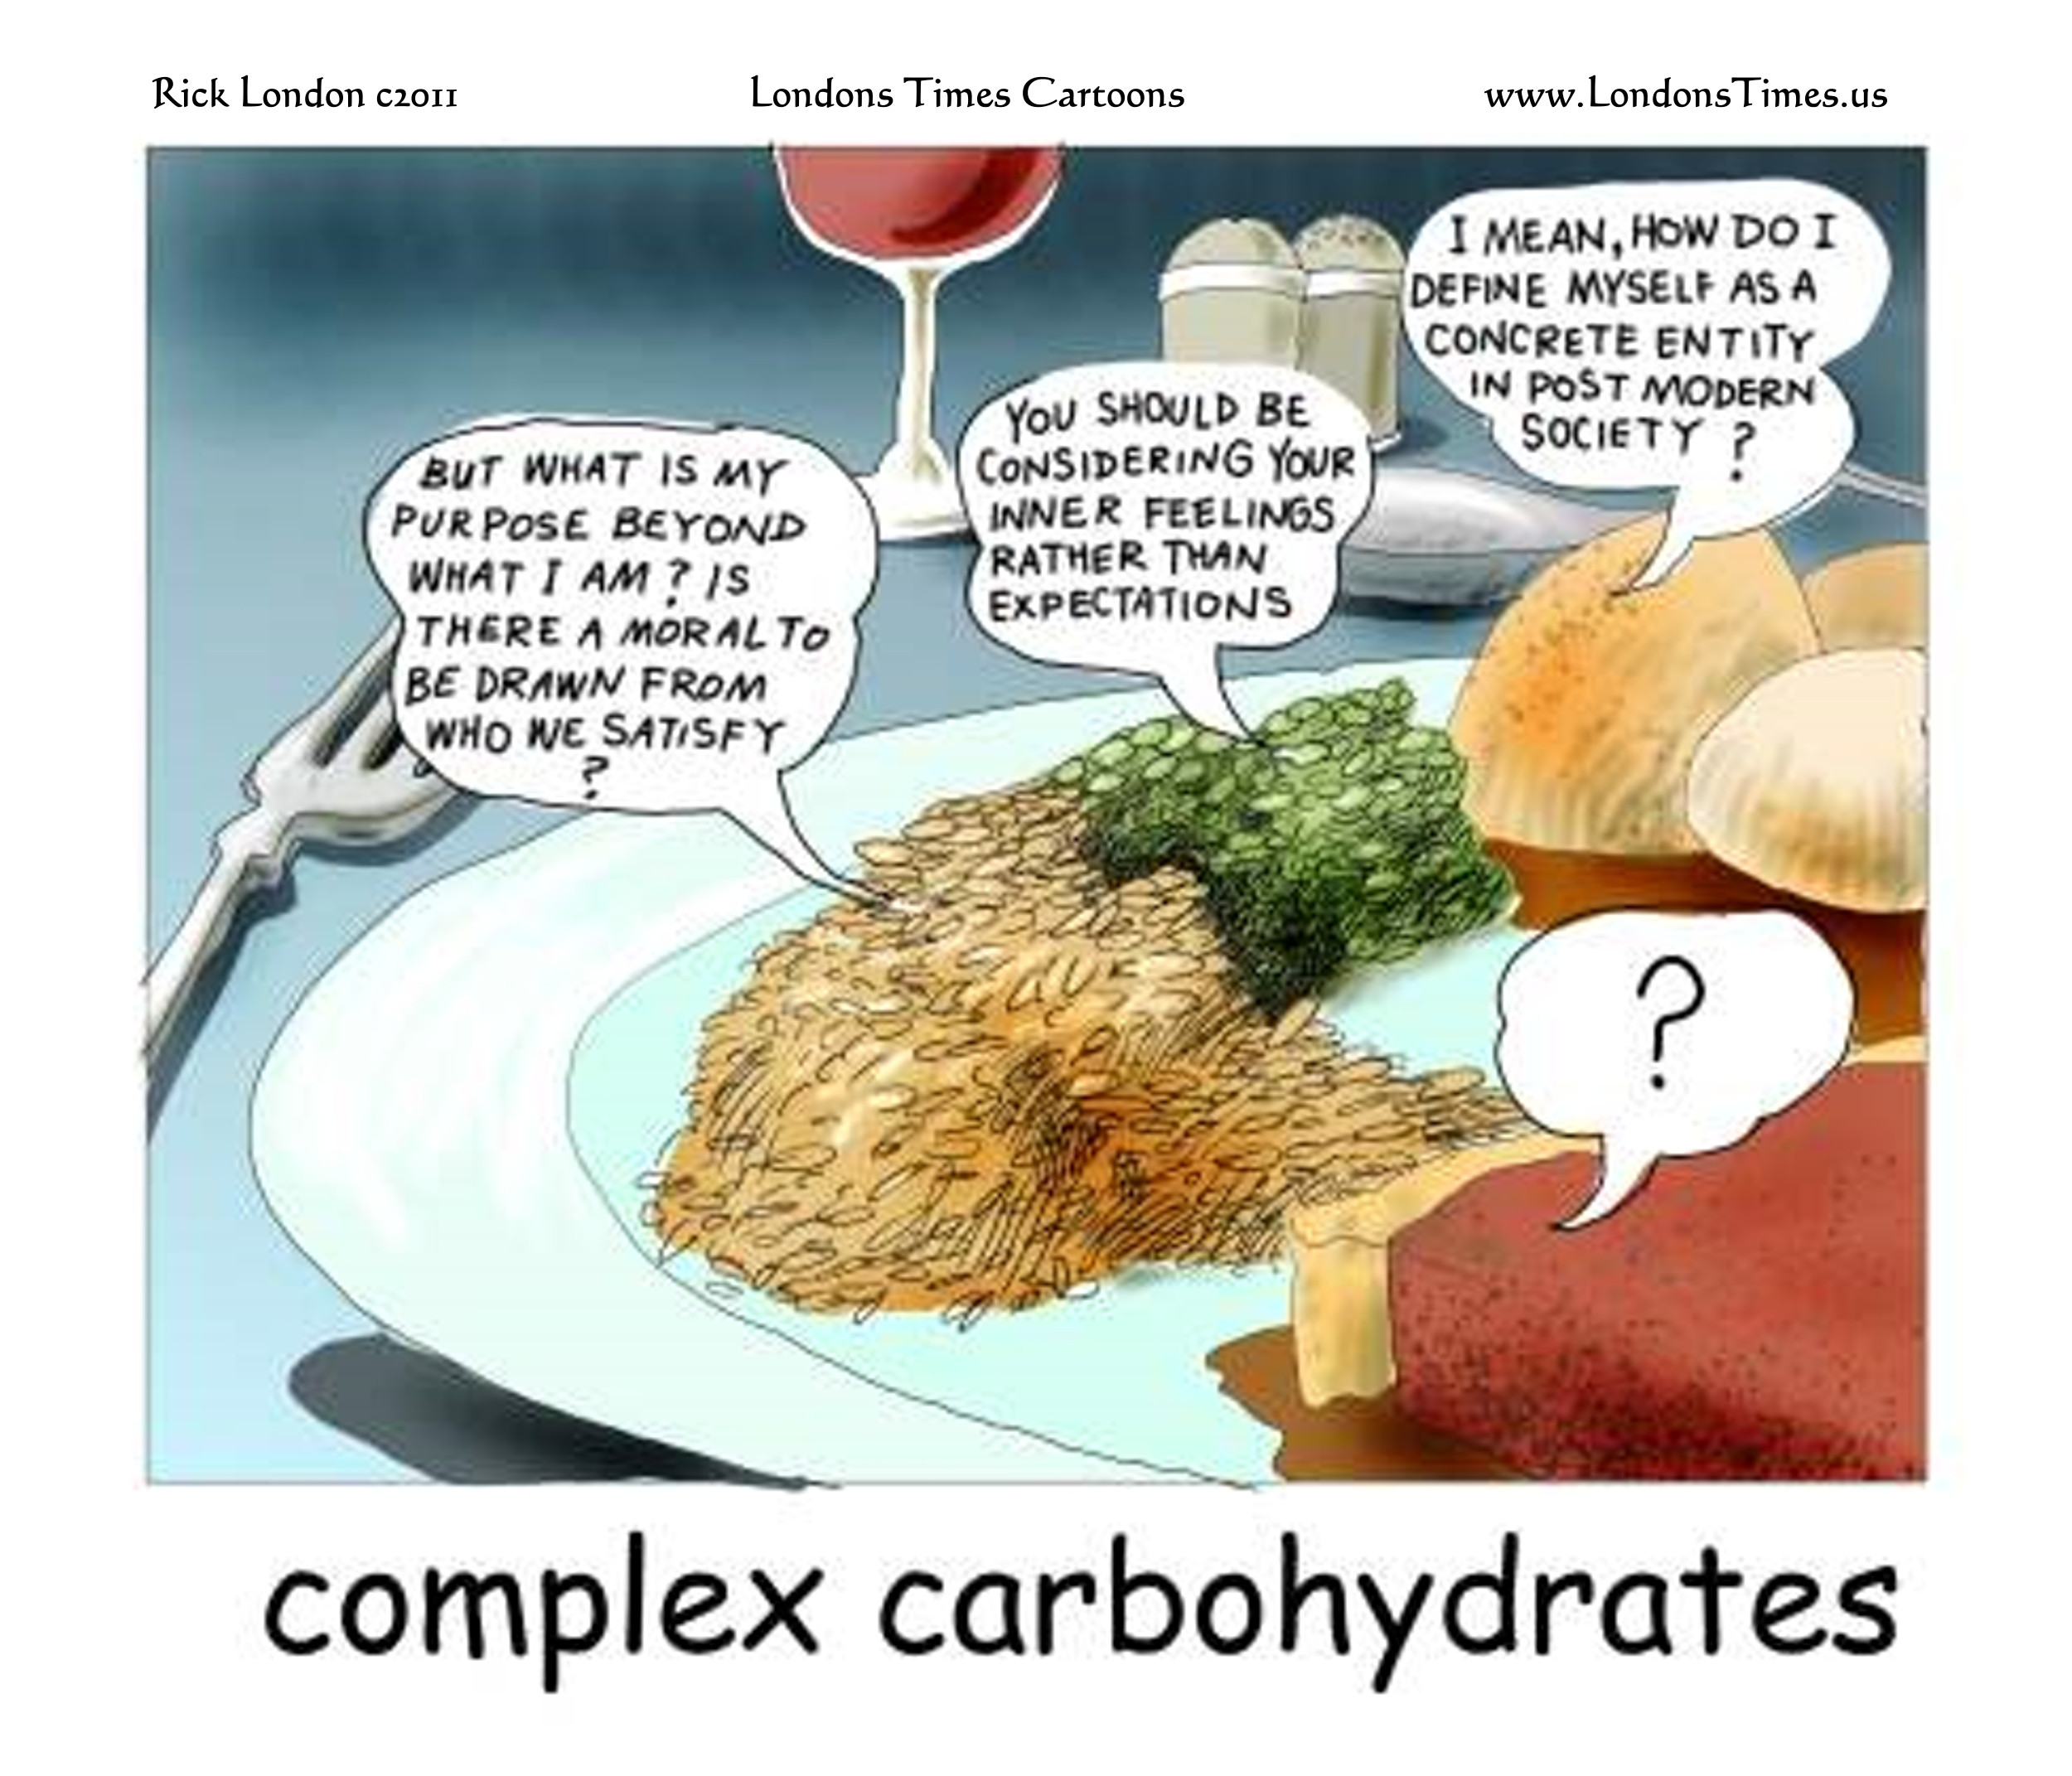 Vegan Thanksgiving Funny
 Way Too plex Carbohydrates The Story Behind The Cartoon